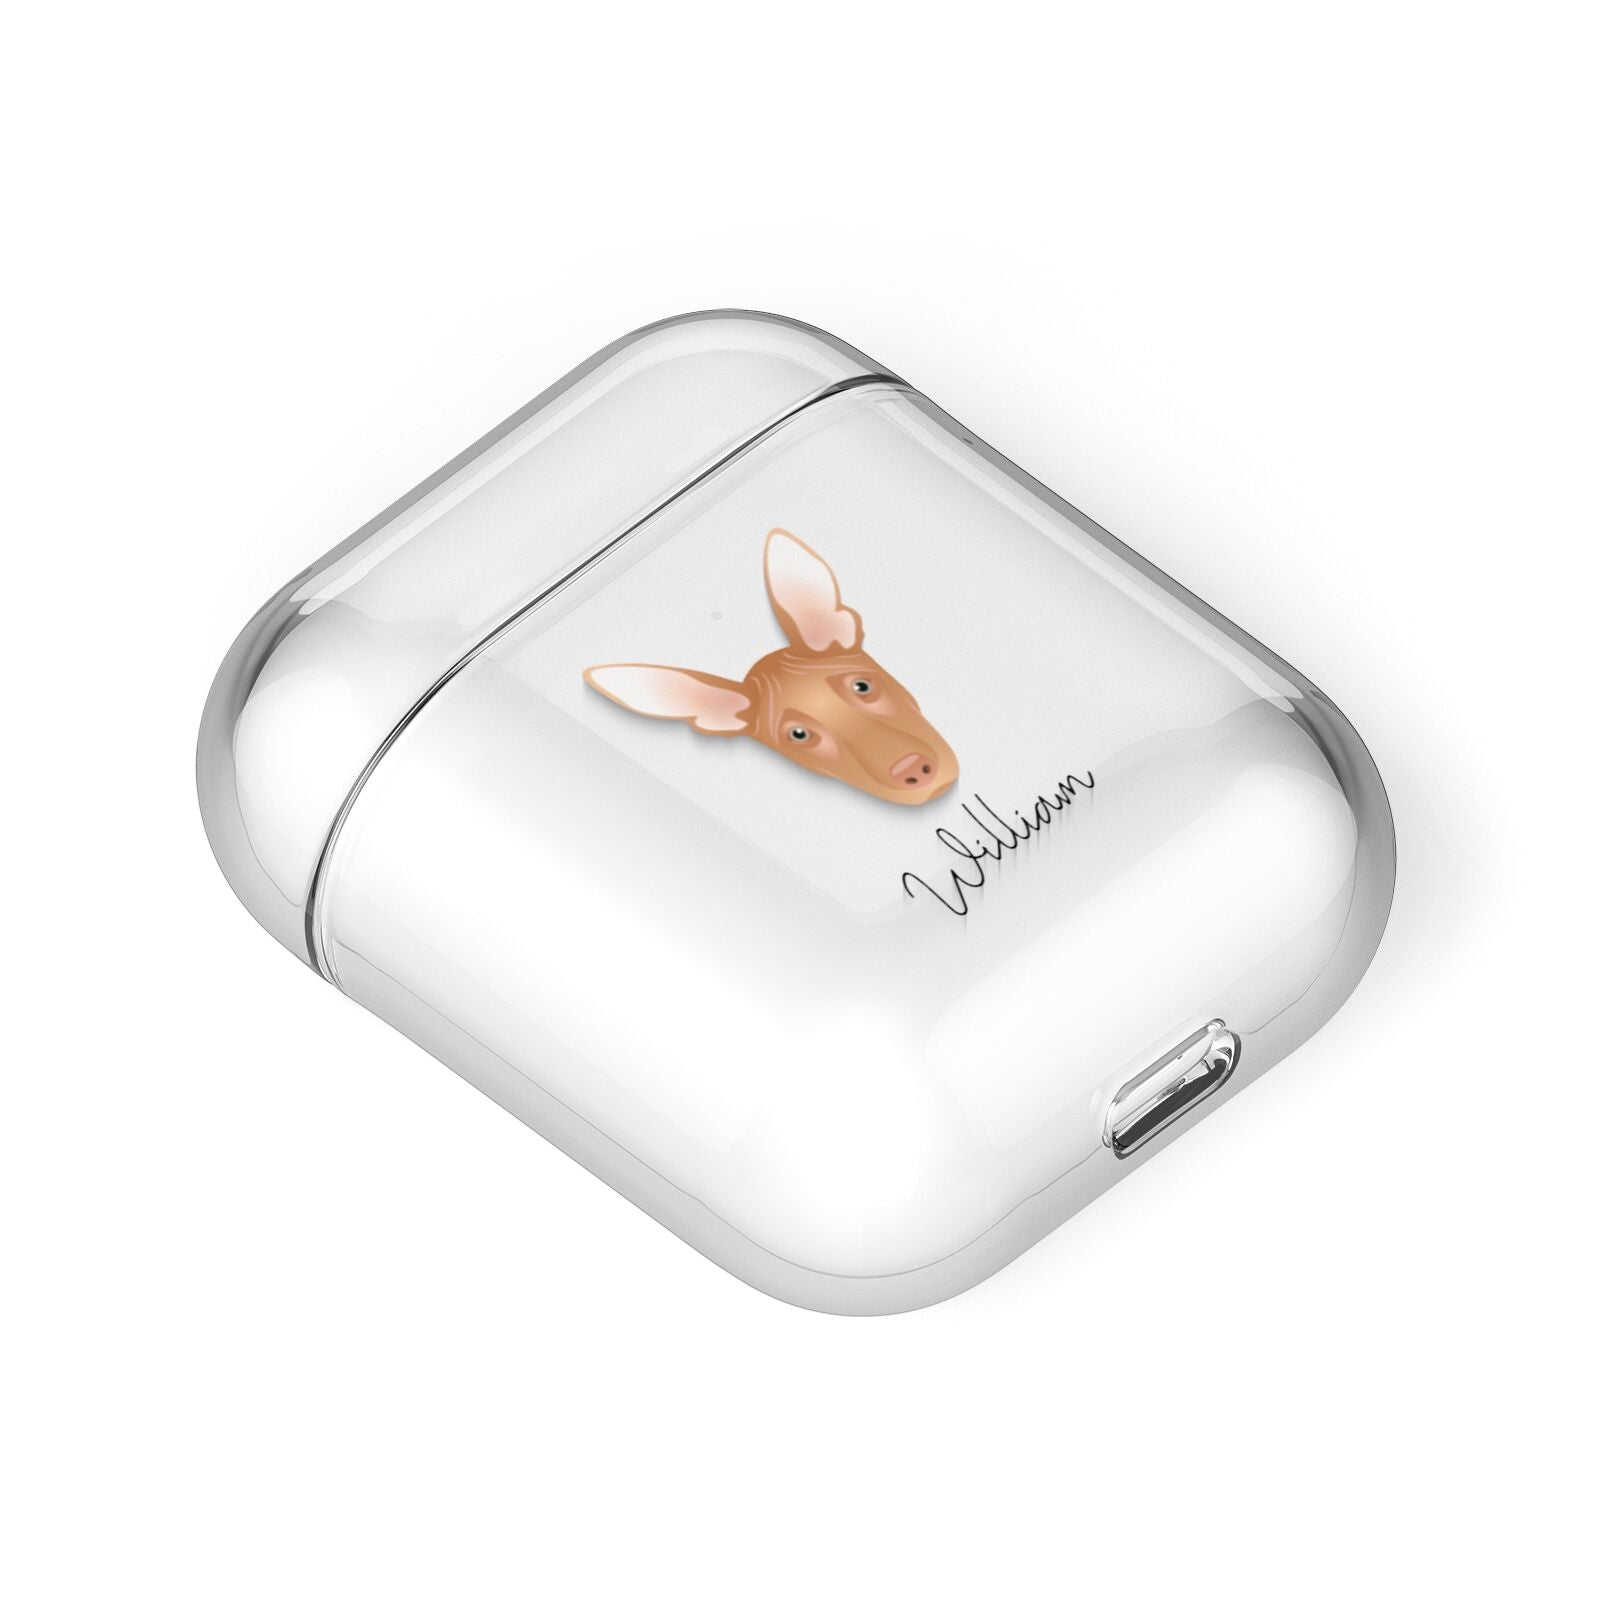 Pharaoh Hound Personalised AirPods Case Laid Flat